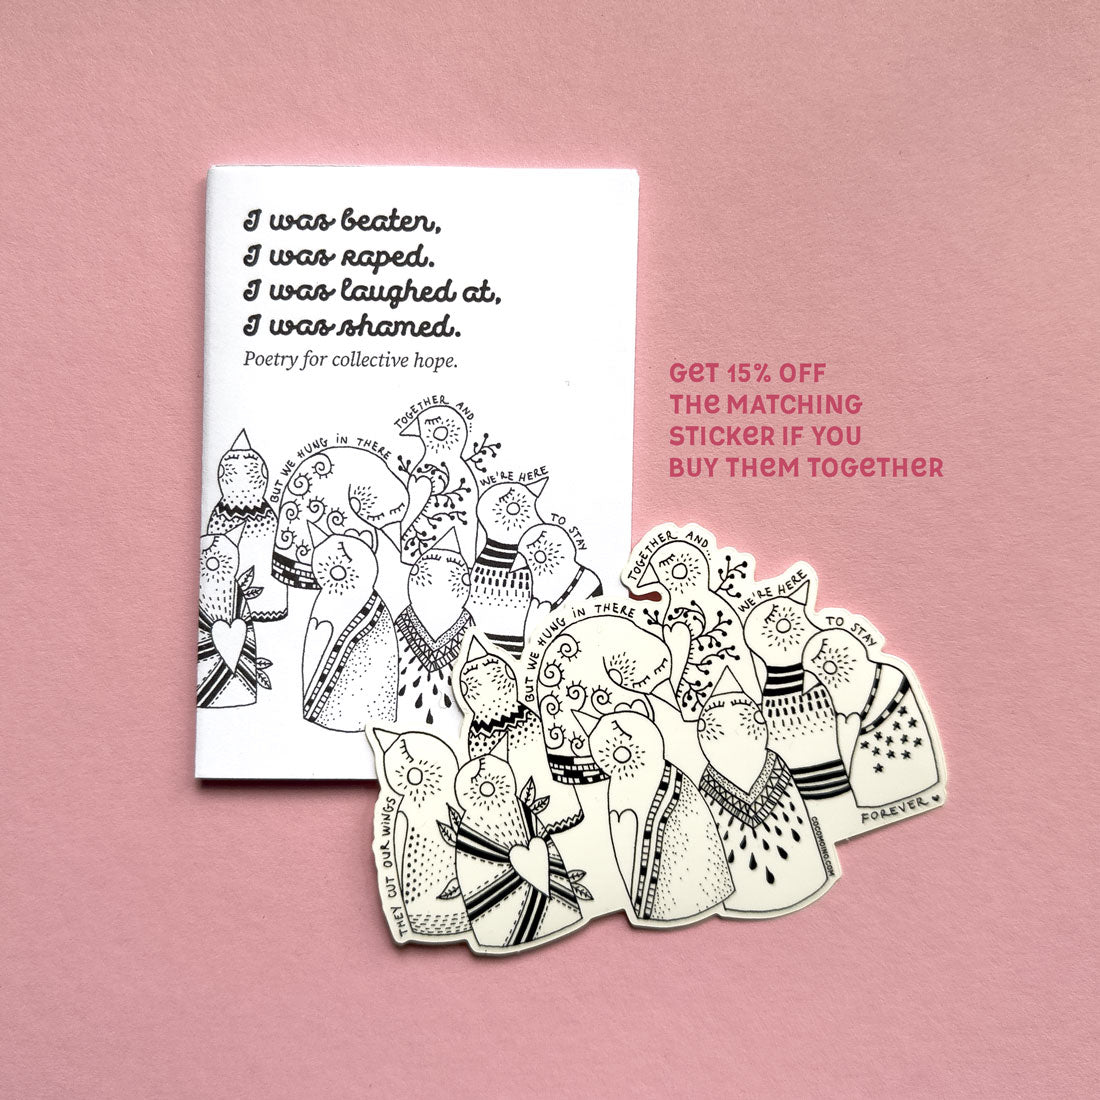 Zine and sticker about being an abuse survivor, mental health after abuse and CPTSD, from autistic artist Coco